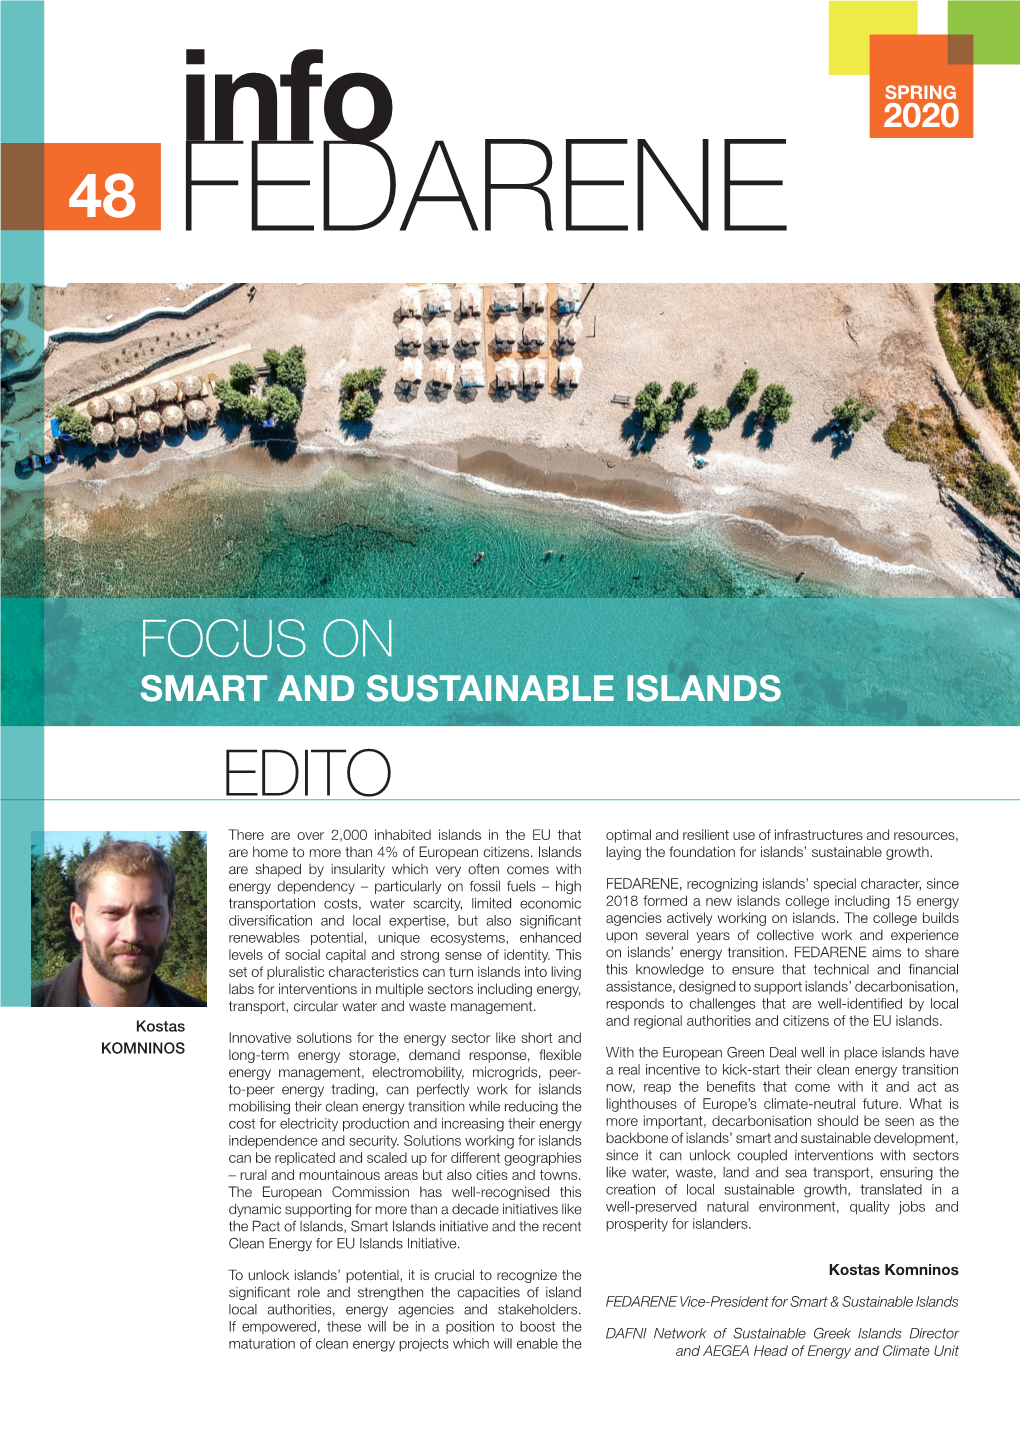 Focus on Smart and Sustainable Islands Edito